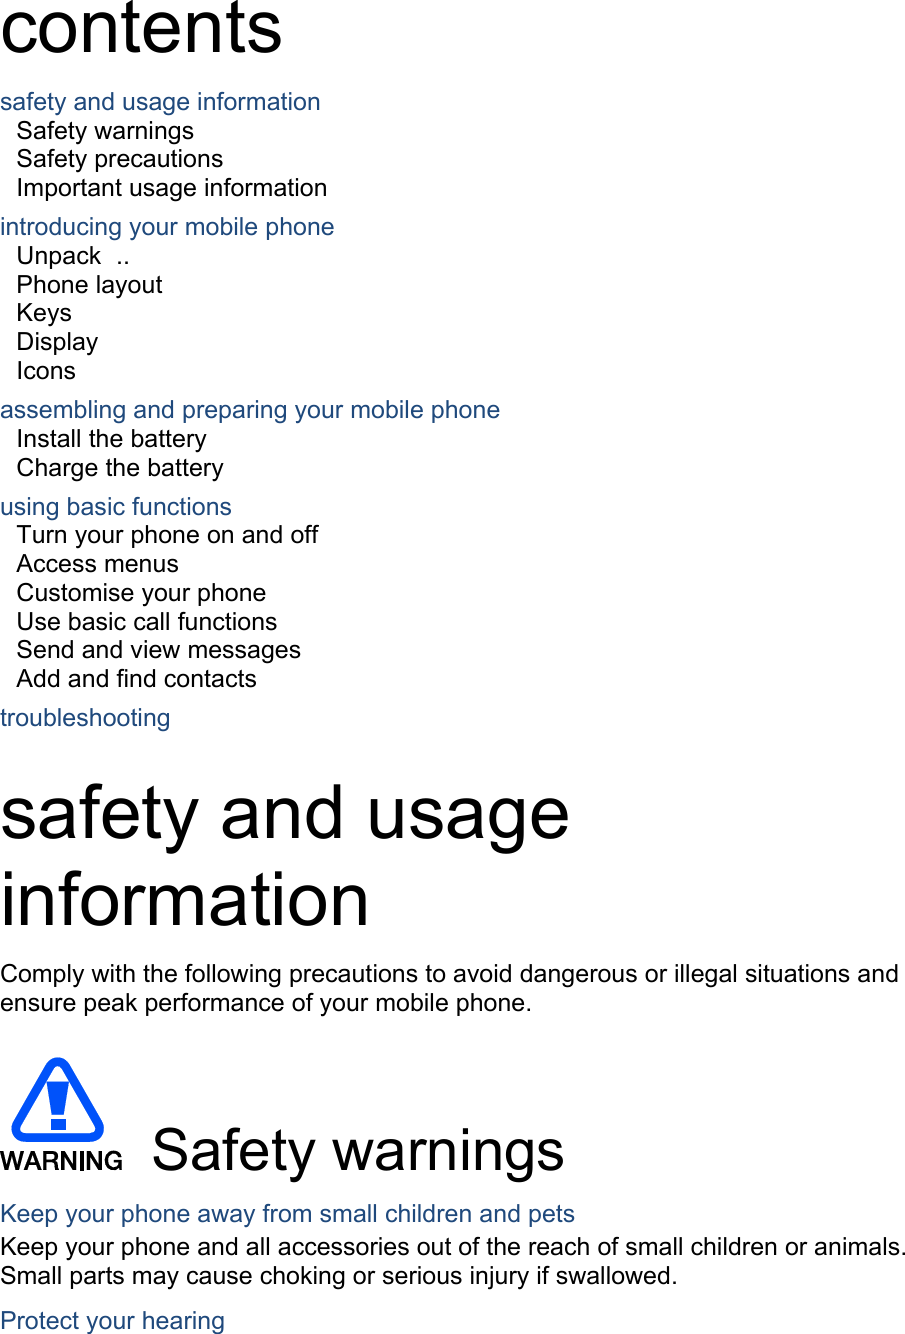  contents safety and usage information     Safety warnings     Safety precautions     Important usage information     introducing your mobile phone     Unpack  ..  Phone layout     Keys  Display  Icons using basic functions    Turn your phone on and off    Access menus     Customise your phone     Use basic call functions     Send and view messages     Add and find contacts     troubleshooting     safety and usage information  Comply with the following precautions to avoid dangerous or illegal situations and ensure peak performance of your mobile phone.   Safety warnings Keep your phone away from small children and pets Keep your phone and all accessories out of the reach of small children or animals. Small parts may cause choking or serious injury if swallowed. Protect your hearing assembling and preparing your mobile phone     Install the battery     Charge the battery     